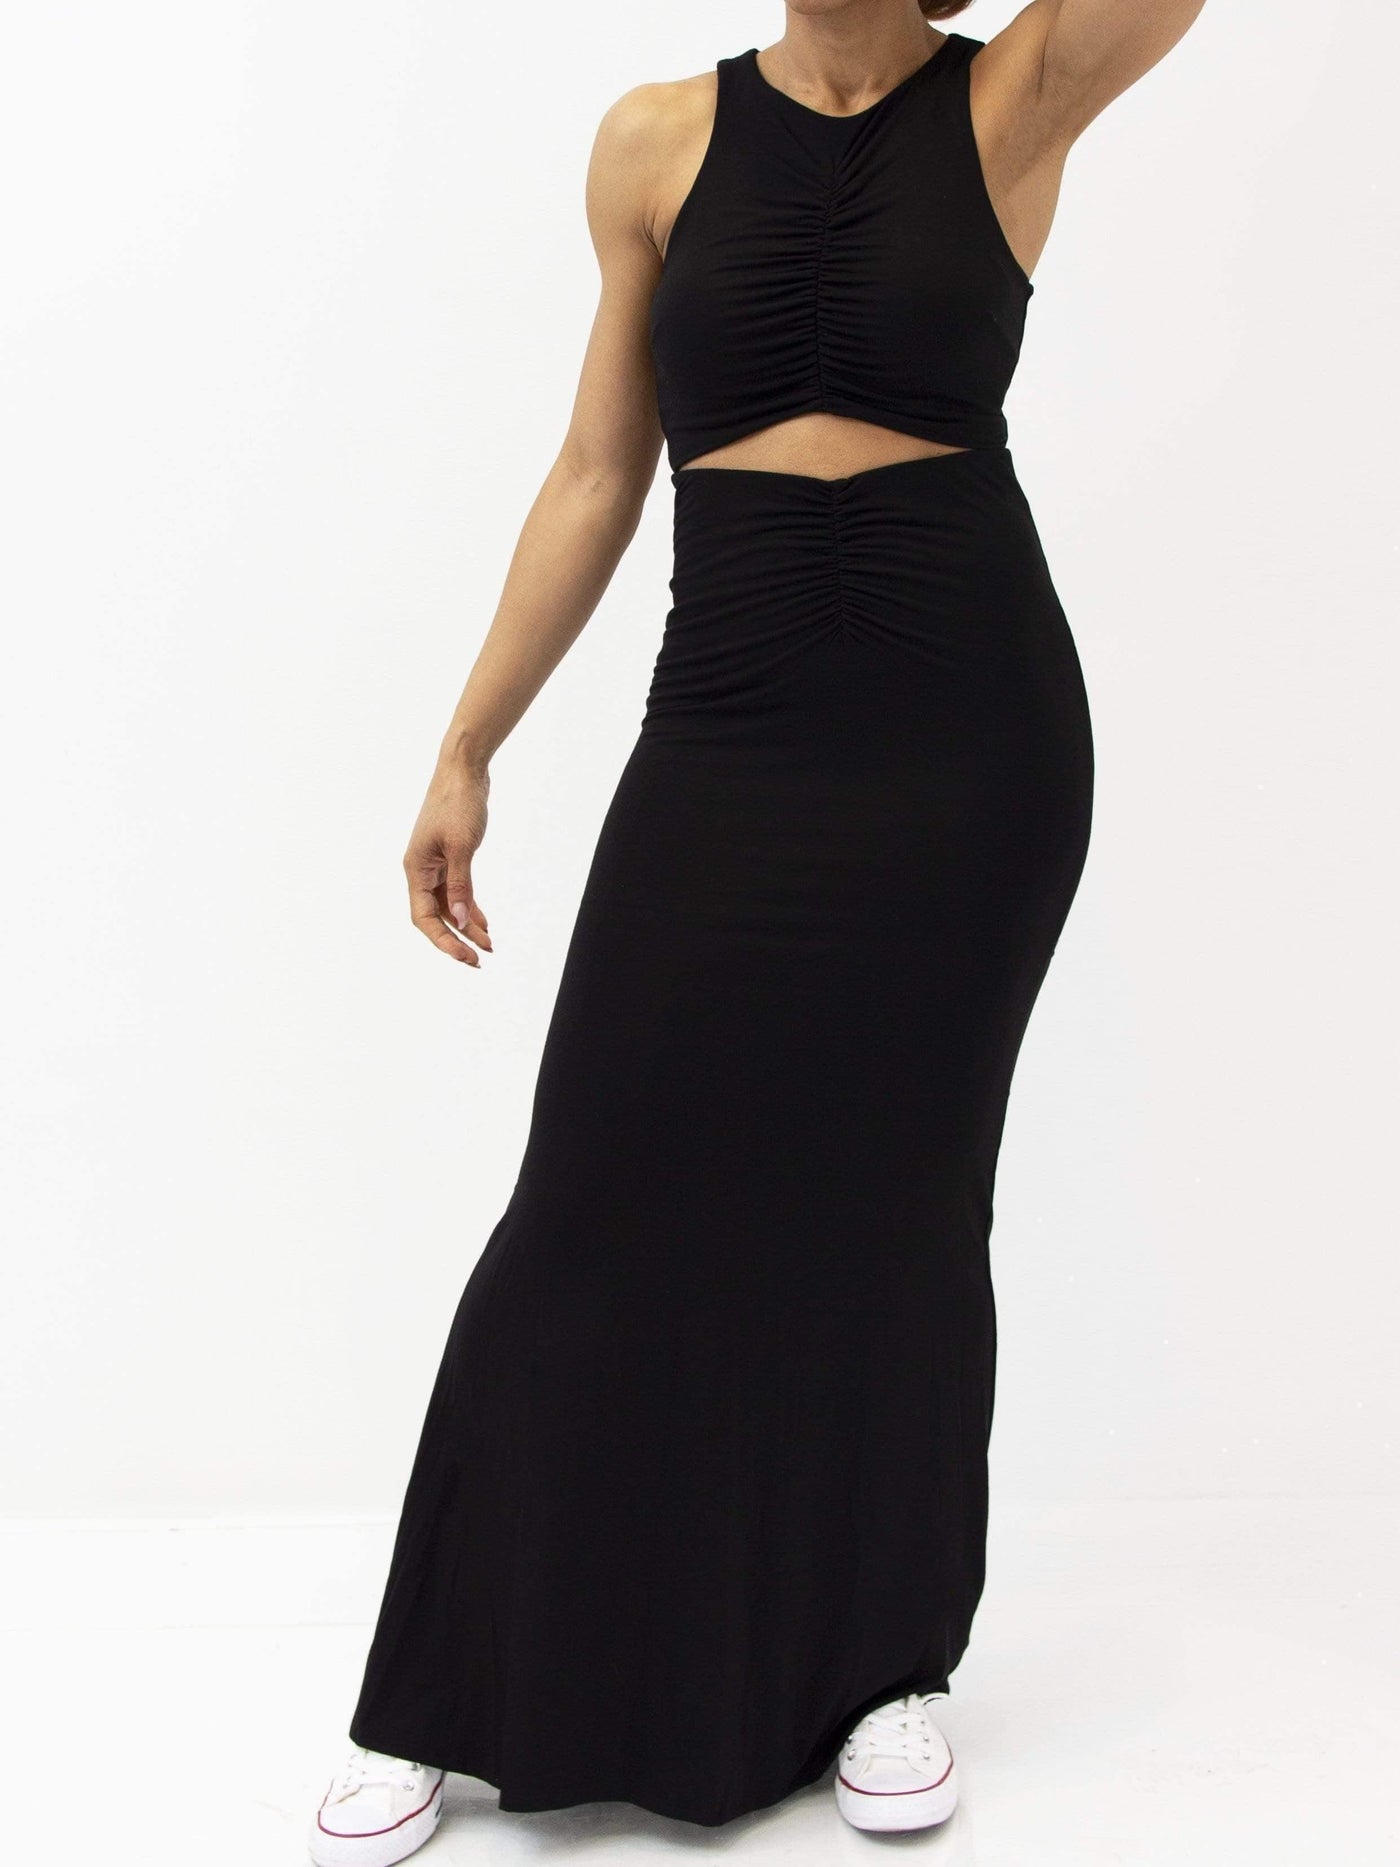 The Mermaid | 2 Piece Maxi Skirt Set - Statement Piece NY _tab_size-chart, Black, Brooklyn Boutique, chic, Crop Top, cute dress, cute dresses for women, dresses, Dresses & Skirts, final, final sale, Maxi Skirt, maxi skirt set, Misses, Monochrome, not clearance, ruched, Set, Sets, Ships from USA, SPNY Exclusive, statement, statement piece, Statement Piece Boutique, statement piece ny, Statement Pieces, Statement Pieces Boutique, Women's Boutique Statement Dresses/Jumpsuits